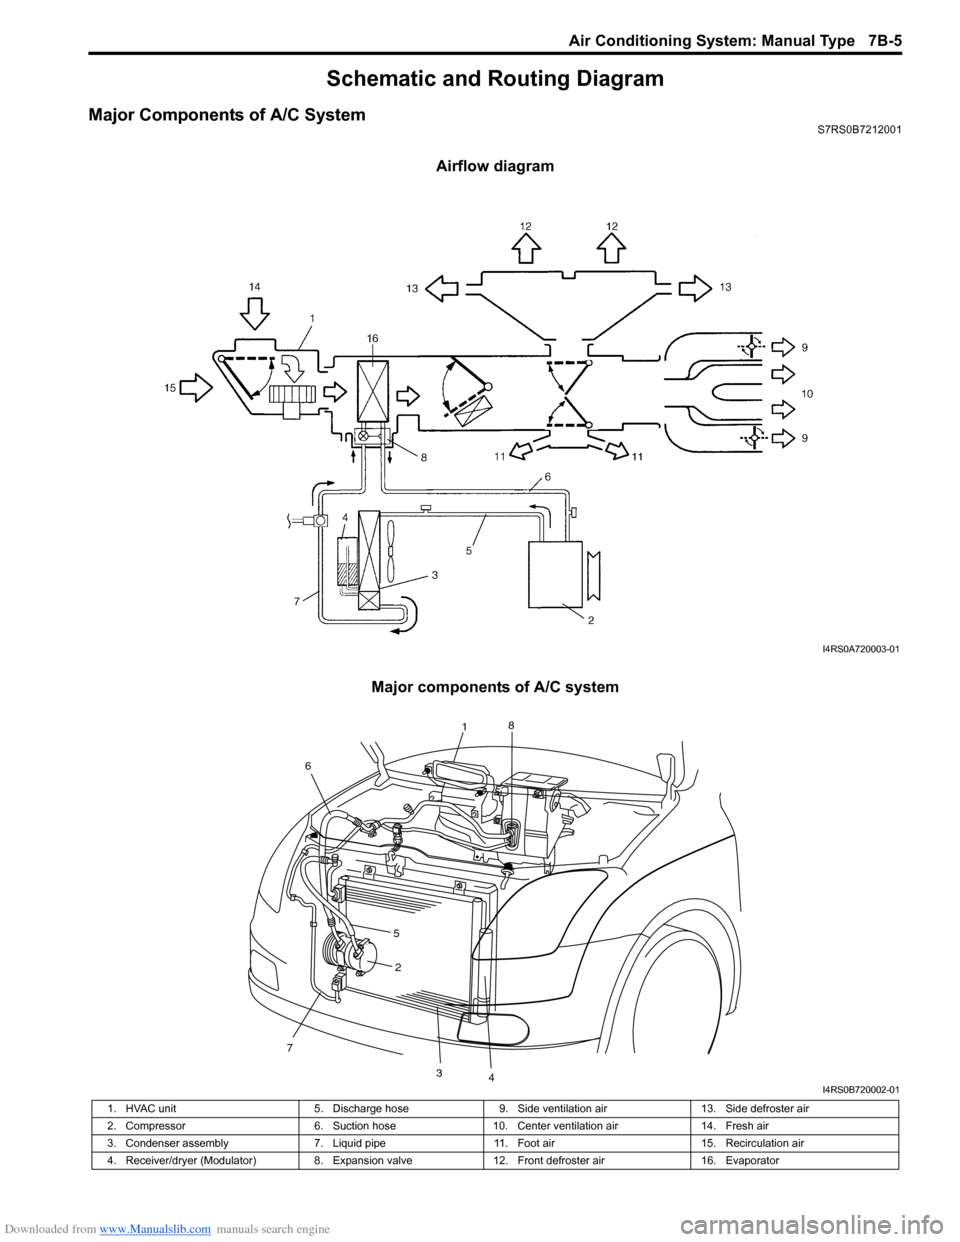 SUZUKI SWIFT 2005 2.G Service Workshop Manual Downloaded from www.Manualslib.com manuals search engine Air Conditioning System: Manual Type 7B-5
Schematic and Routing Diagram
Major Components of A/C SystemS7RS0B7212001
Airflow diagram
Major compo